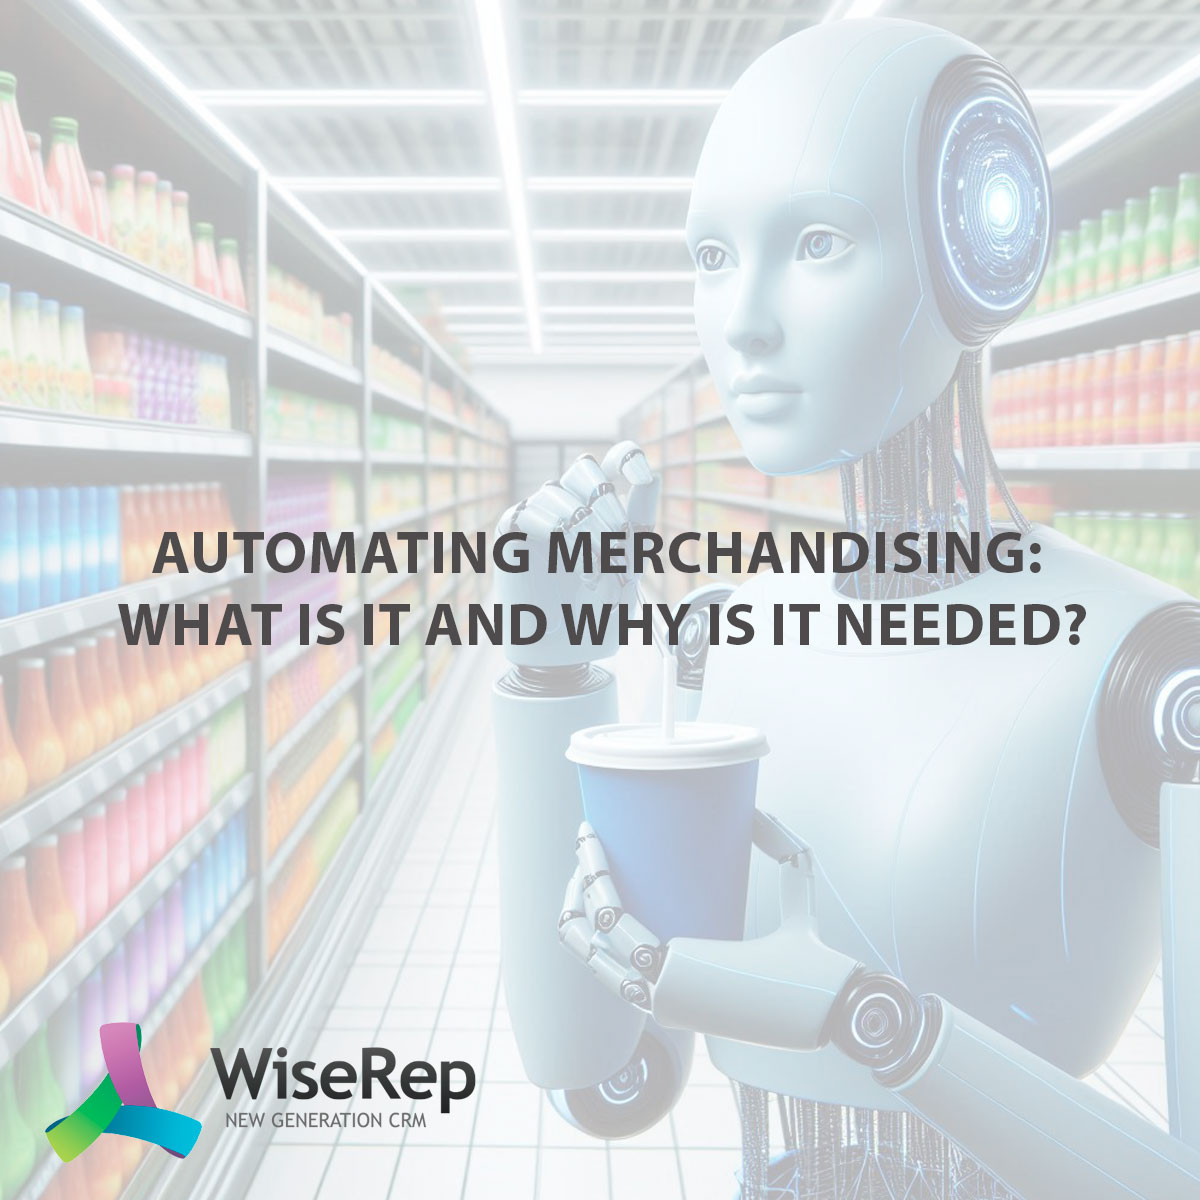 Automating Merchandising: What Is It and Why Is It Needed?